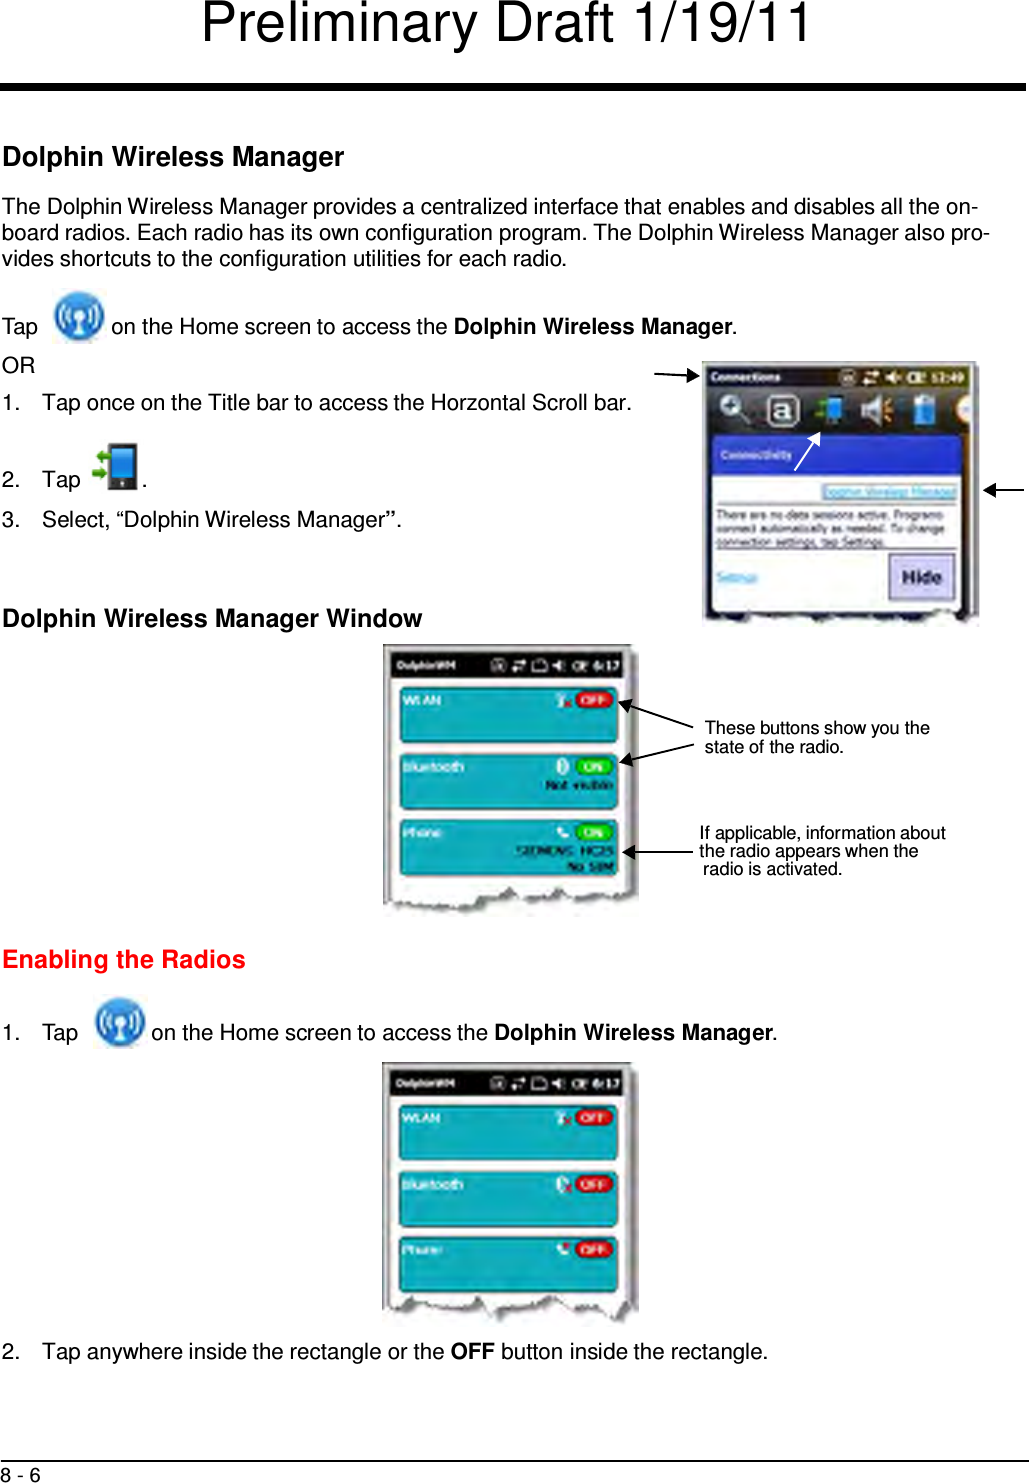 Preliminary Draft 1/19/11 8 - 6        Dolphin Wireless Manager  The Dolphin Wireless Manager provides a centralized interface that enables and disables all the on- board radios. Each radio has its own configuration program. The Dolphin Wireless Manager also pro- vides shortcuts to the configuration utilities for each radio.   Tap  on the Home screen to access the Dolphin Wireless Manager. OR 1.  Tap once on the Title bar to access the Horzontal Scroll bar.    2.  Tap  .  3.  Select, “Dolphin Wireless Manager”.    Dolphin Wireless Manager Window     These buttons show you the state of the radio.    If applicable, information about the radio appears when the radio is activated.    Enabling the Radios   1.  Tap  on the Home screen to access the Dolphin Wireless Manager.               2.  Tap anywhere inside the rectangle or the OFF button inside the rectangle. 